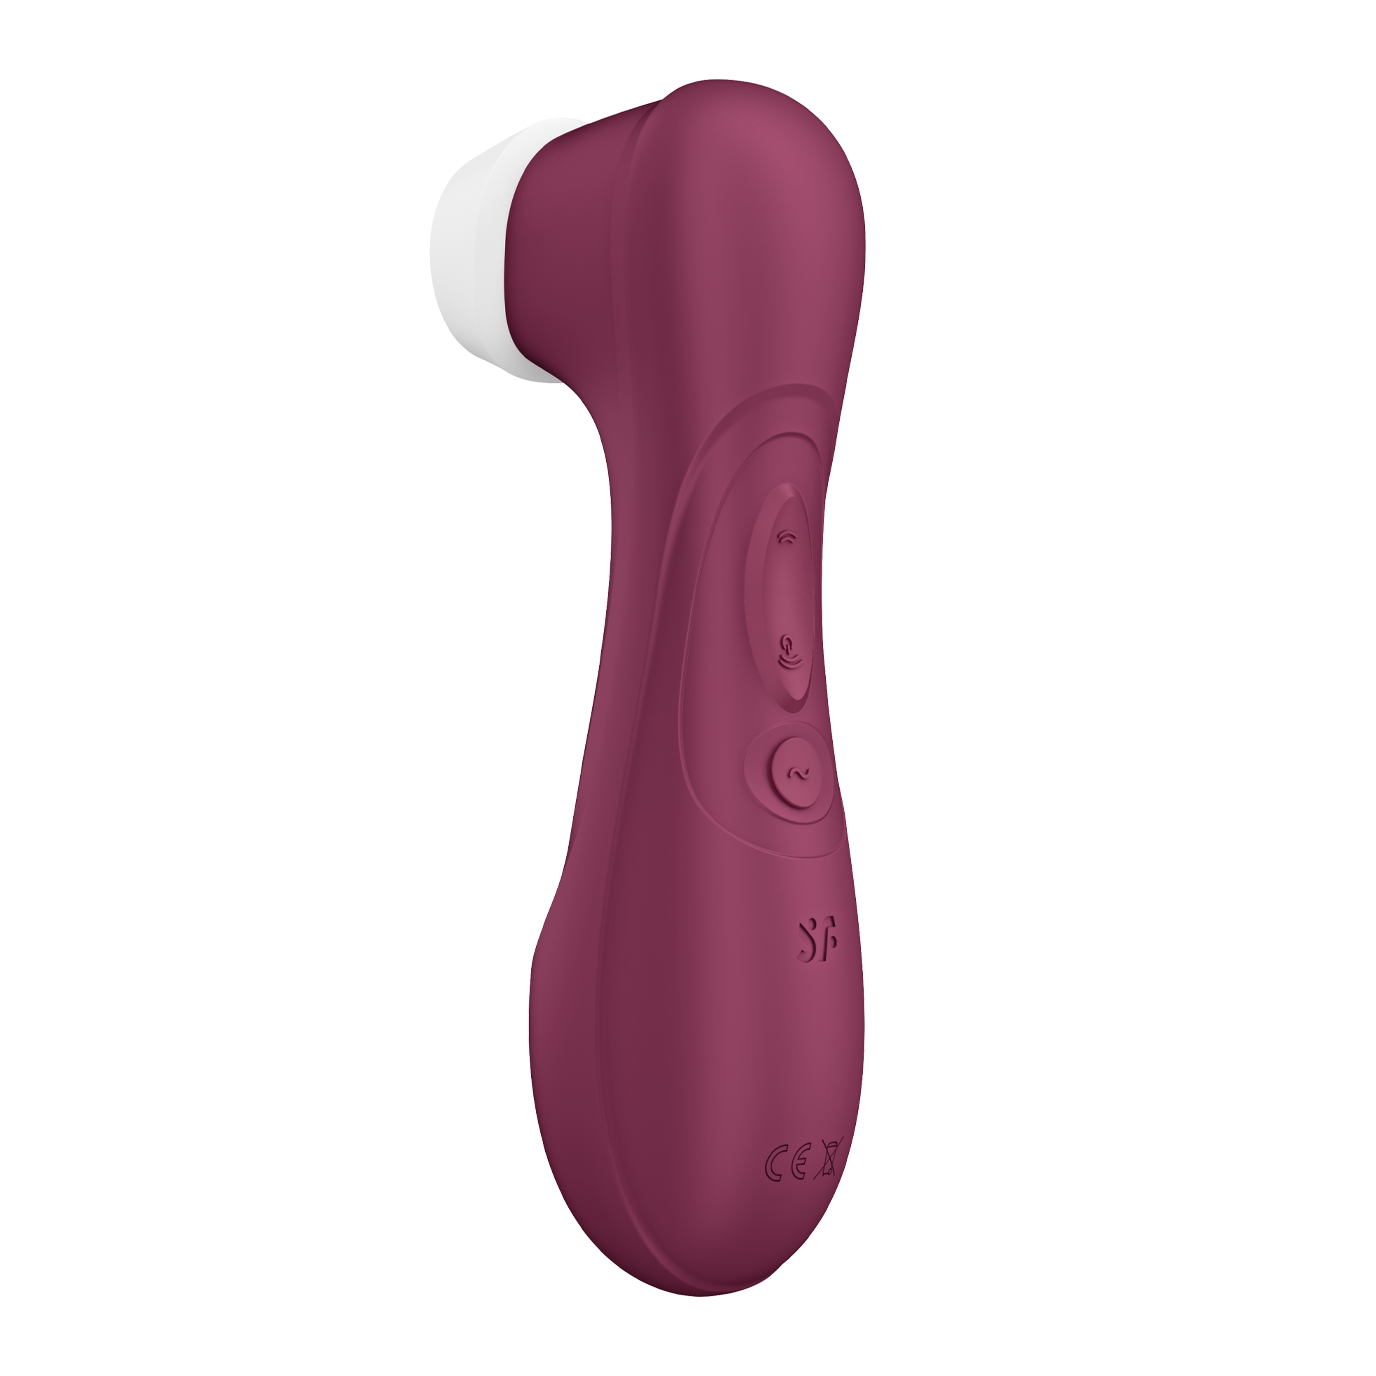 A 3/4ths view of the Satisfyer Pro 2 - Generation 3. This angle shows off the control buttons for the toy. There are three buttons on the handle of the toy. Two buttons control the air suction intensities while the third button controls the vibrations. | Kinkly Shop